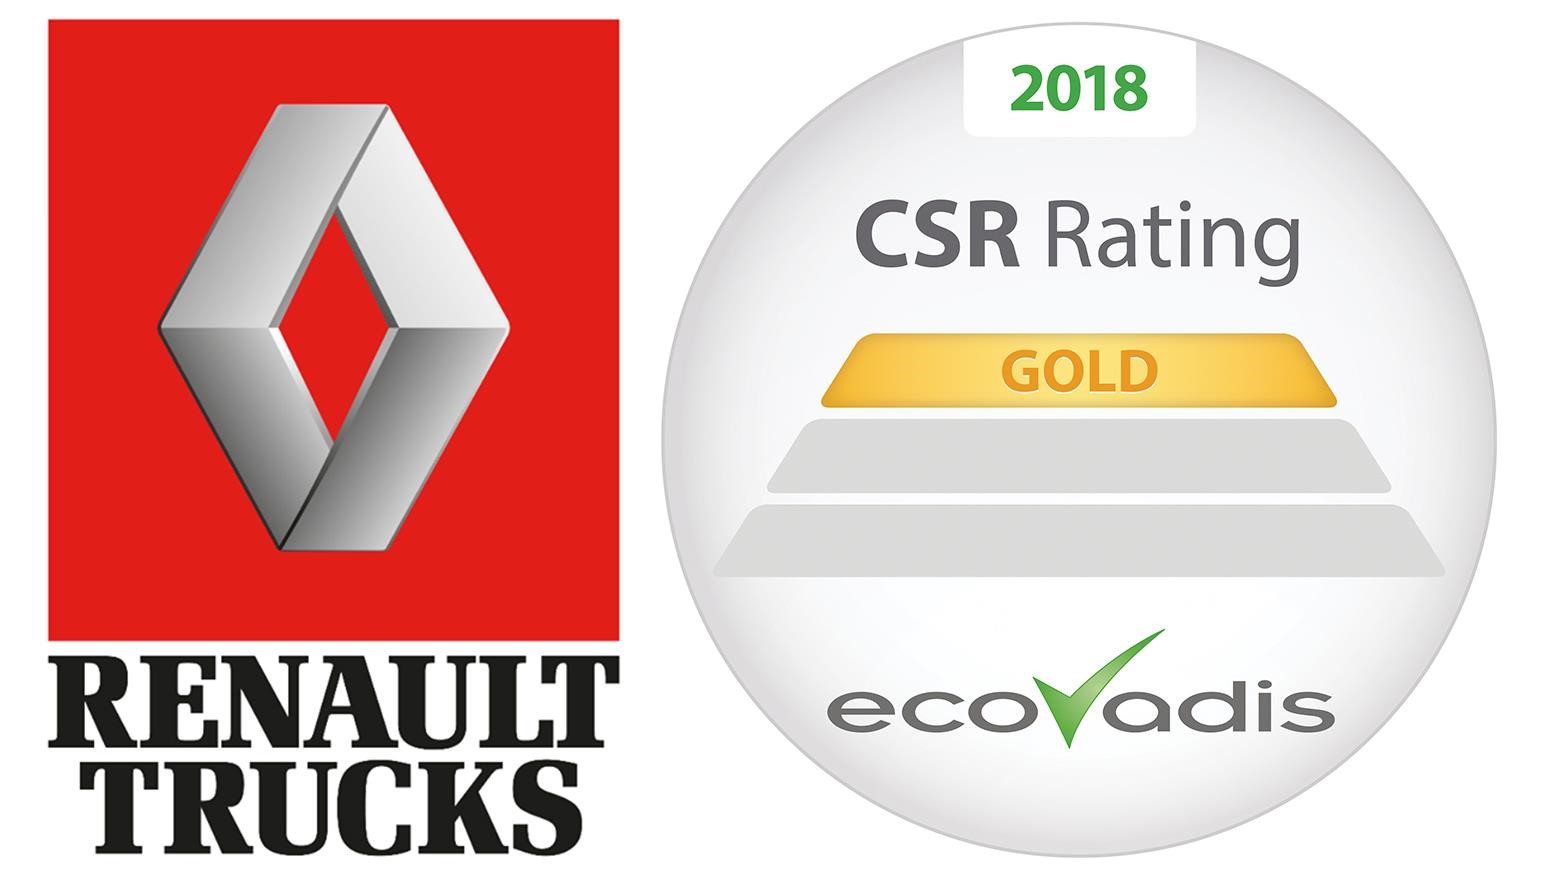 Renault Trucks Earns Gold Rating From Ecovadis